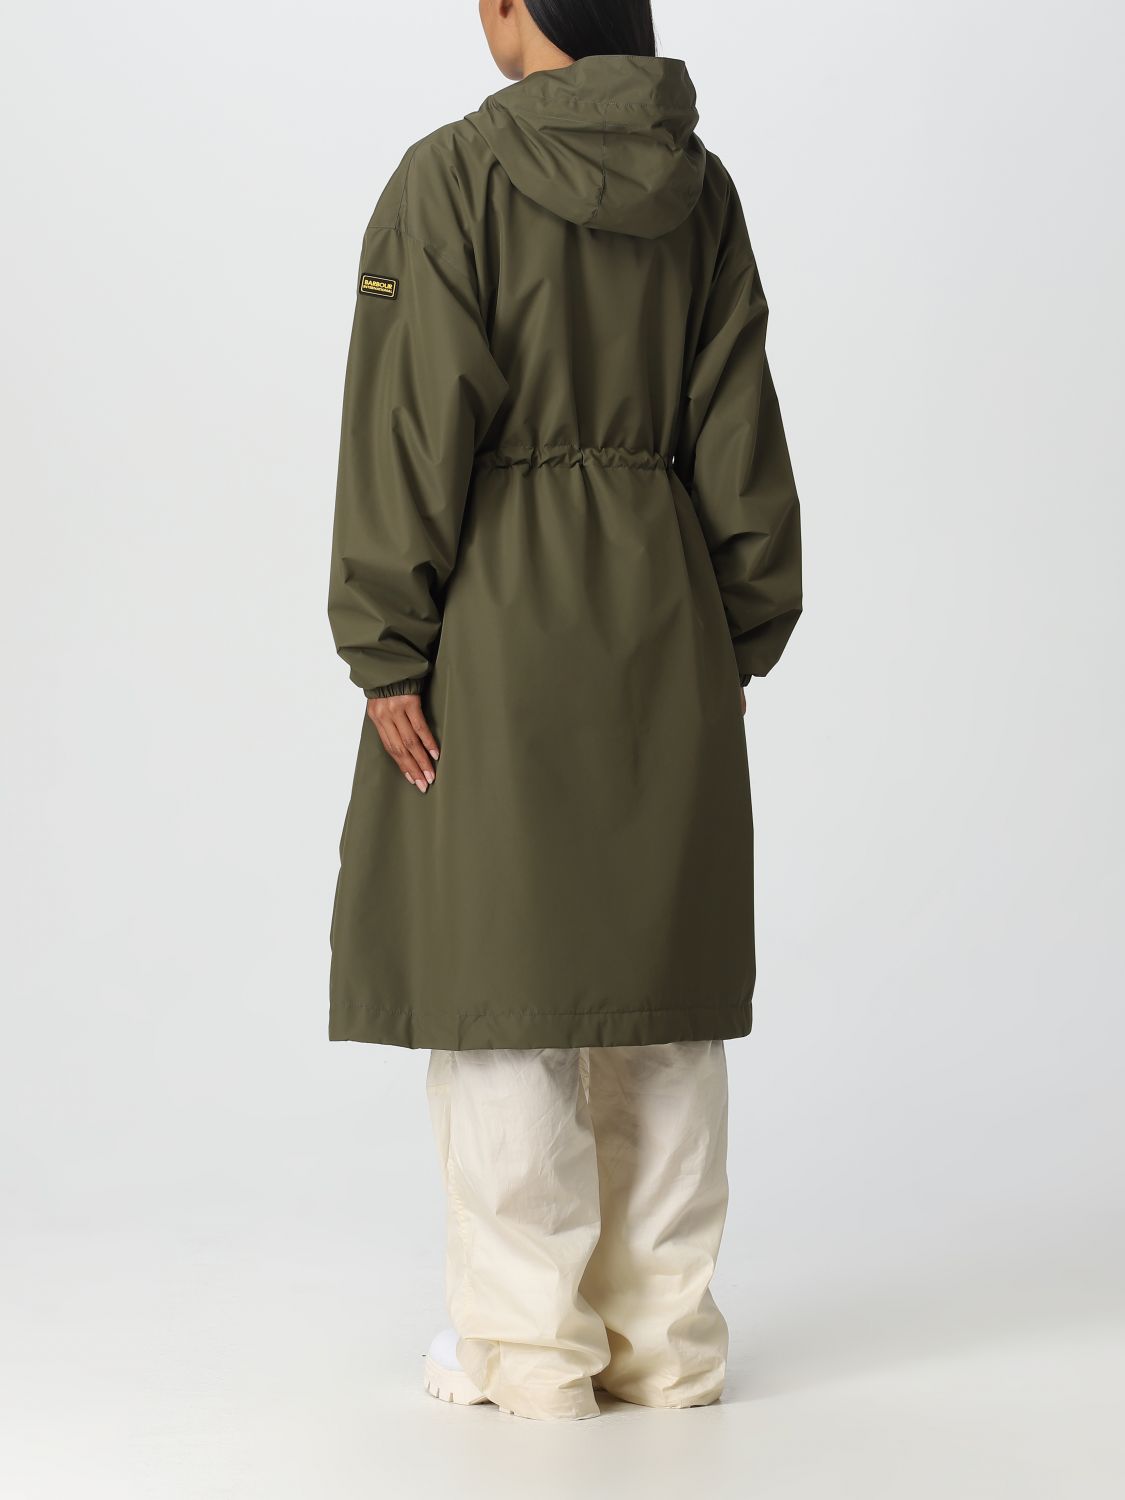 BARBOUR: jacket for woman - Green | Barbour jacket LSP0101 online on ...